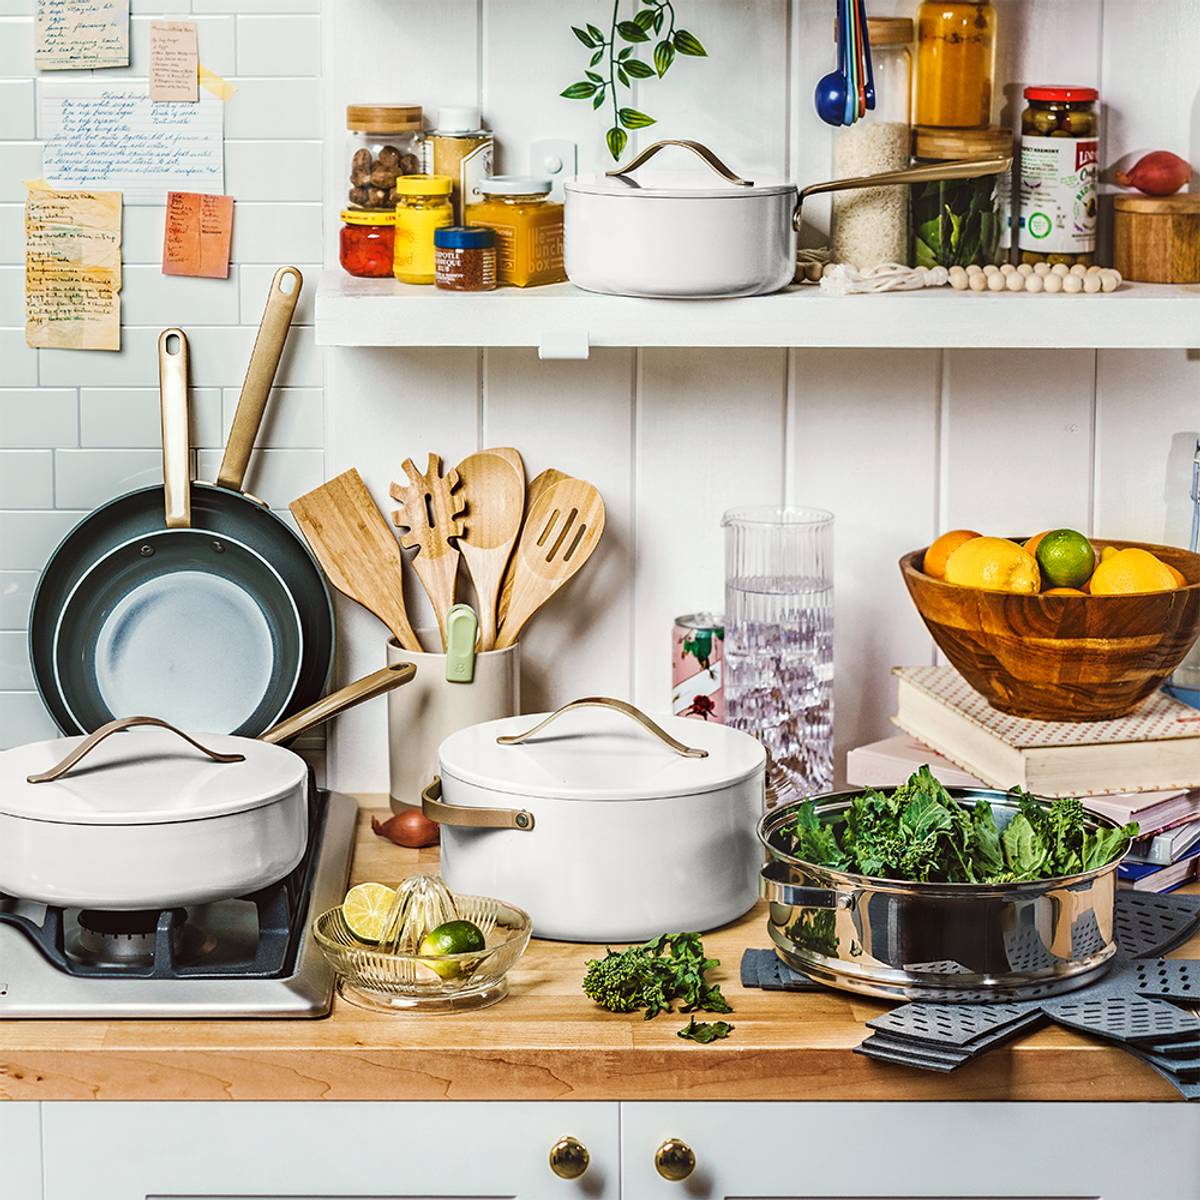 Cast Iron Pots and Pans, Oven-to-Table Cookware